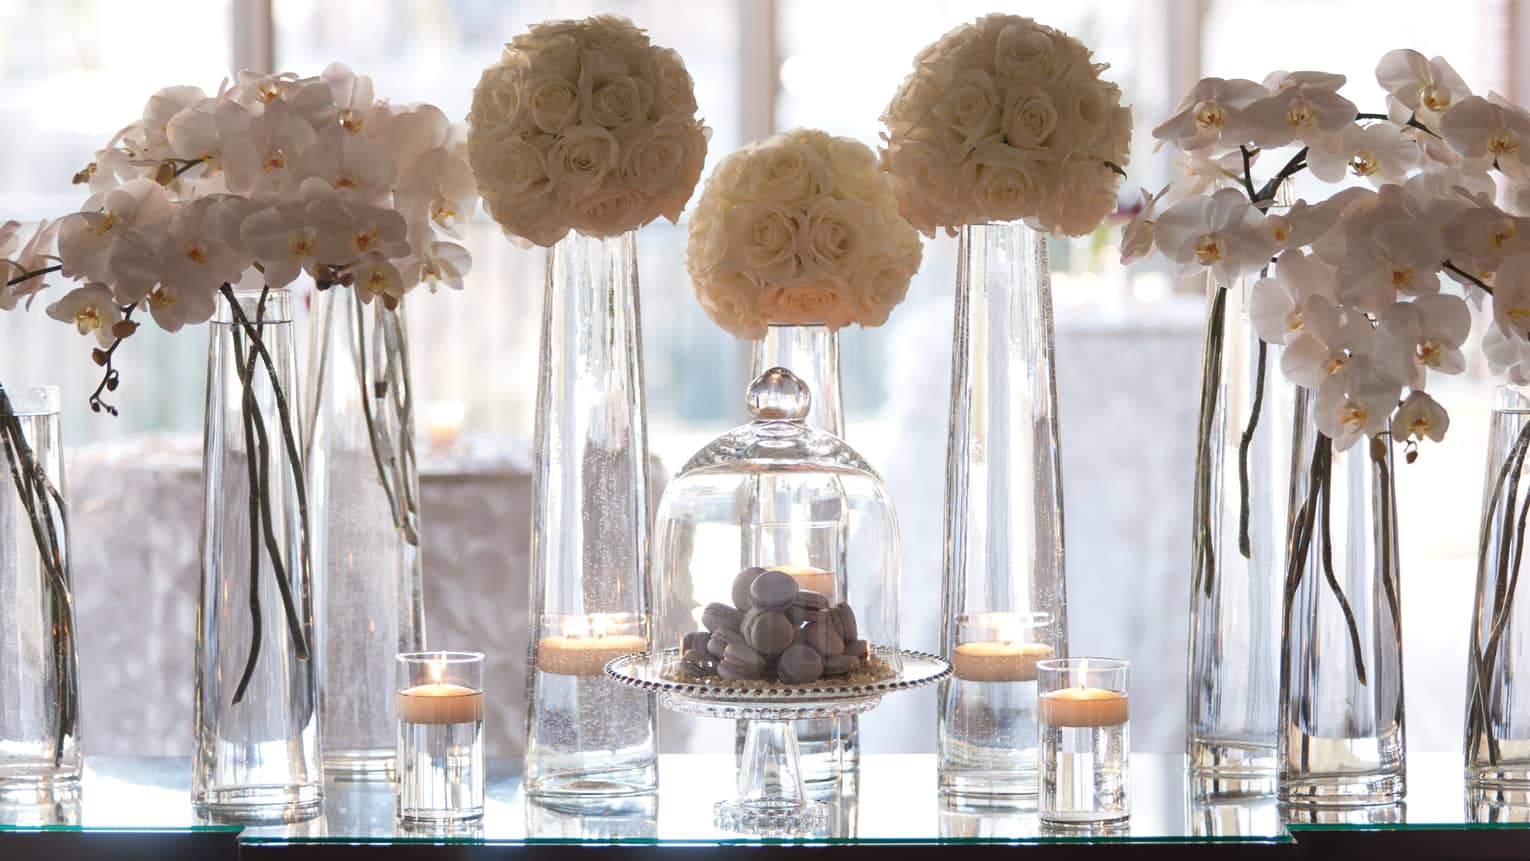 Flowers in tall glass vases, macarons in glass dessert display on table by window